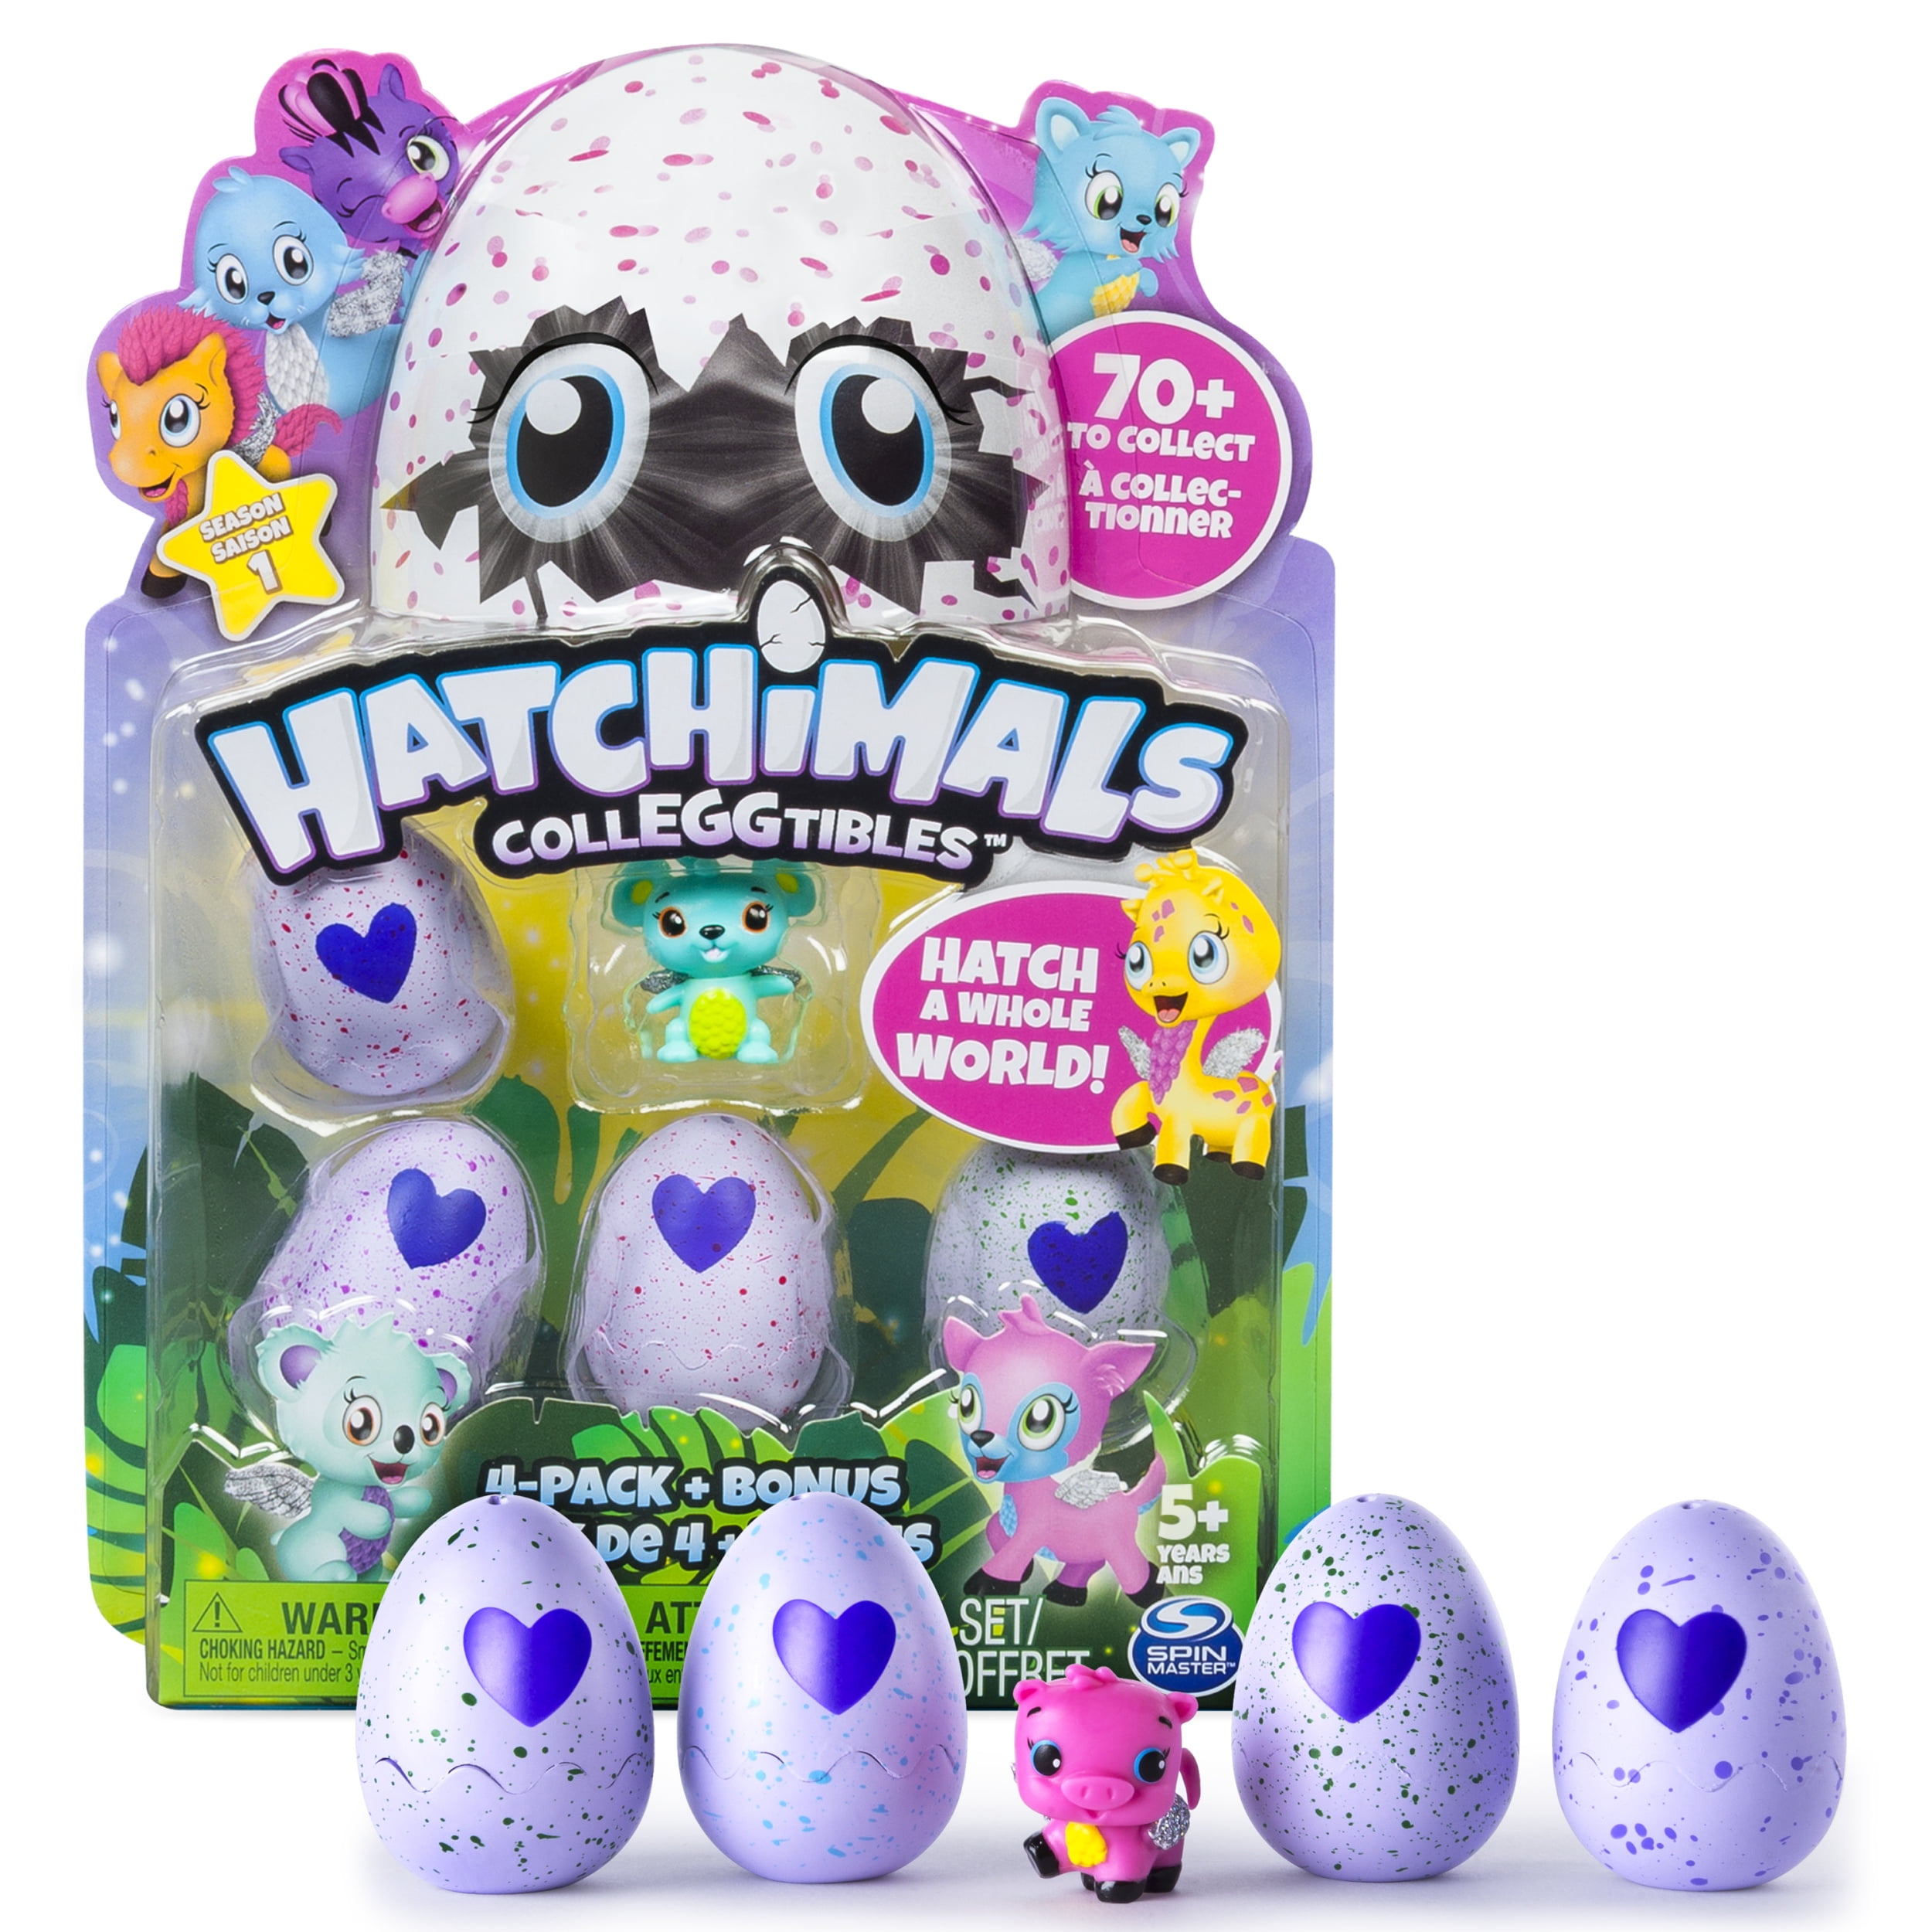 Brand New Exclusive @ Walmart—SOLD OUT HATCHIMAL GOLDEN LYNX Ready 2 ship 